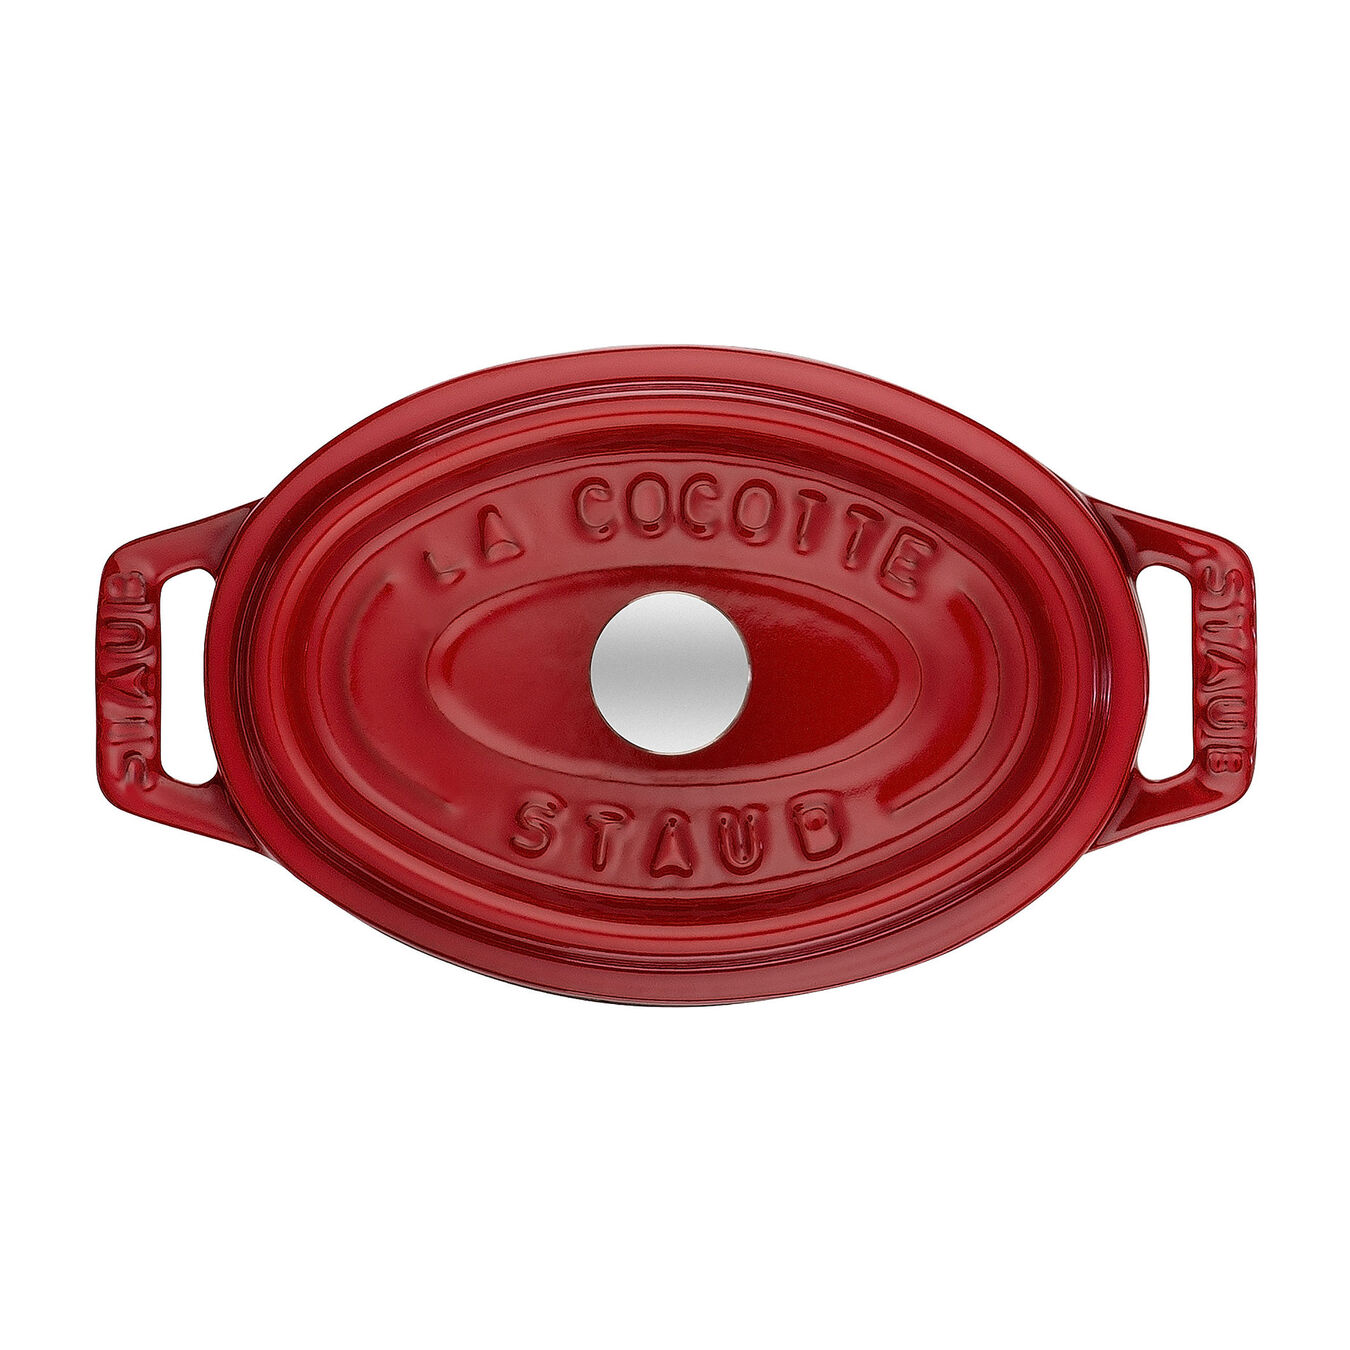 Mini Cocotte 11 cm, oval, Kirsch-Rot, Gusseisen,,large 2